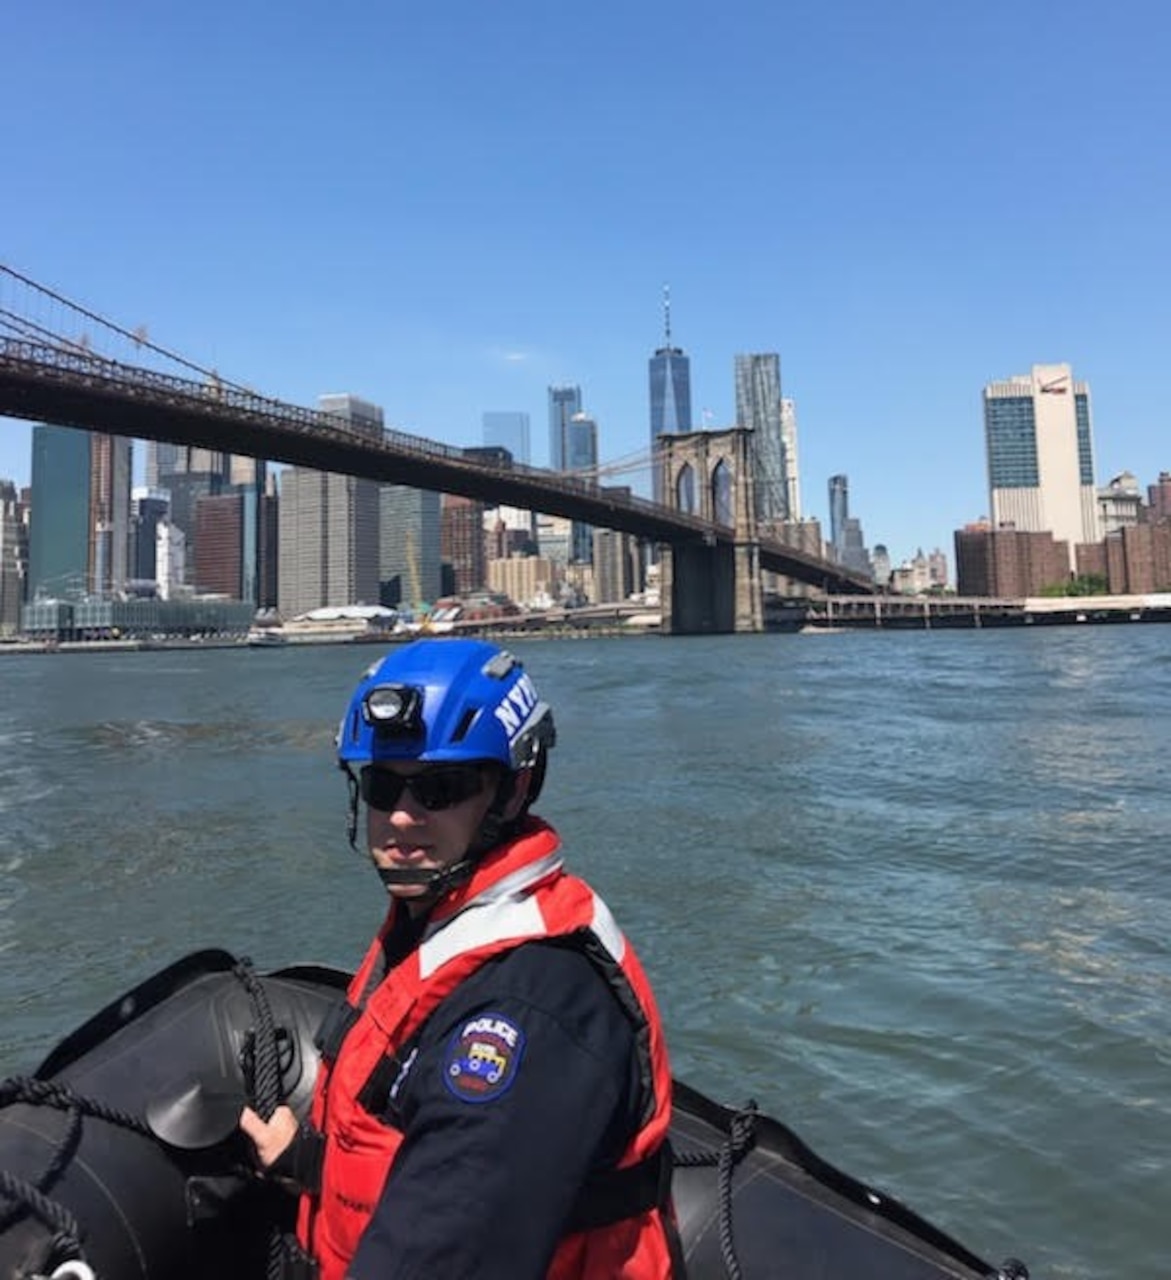 A man floats in a boat near a bridge; a city skyline is in the background.